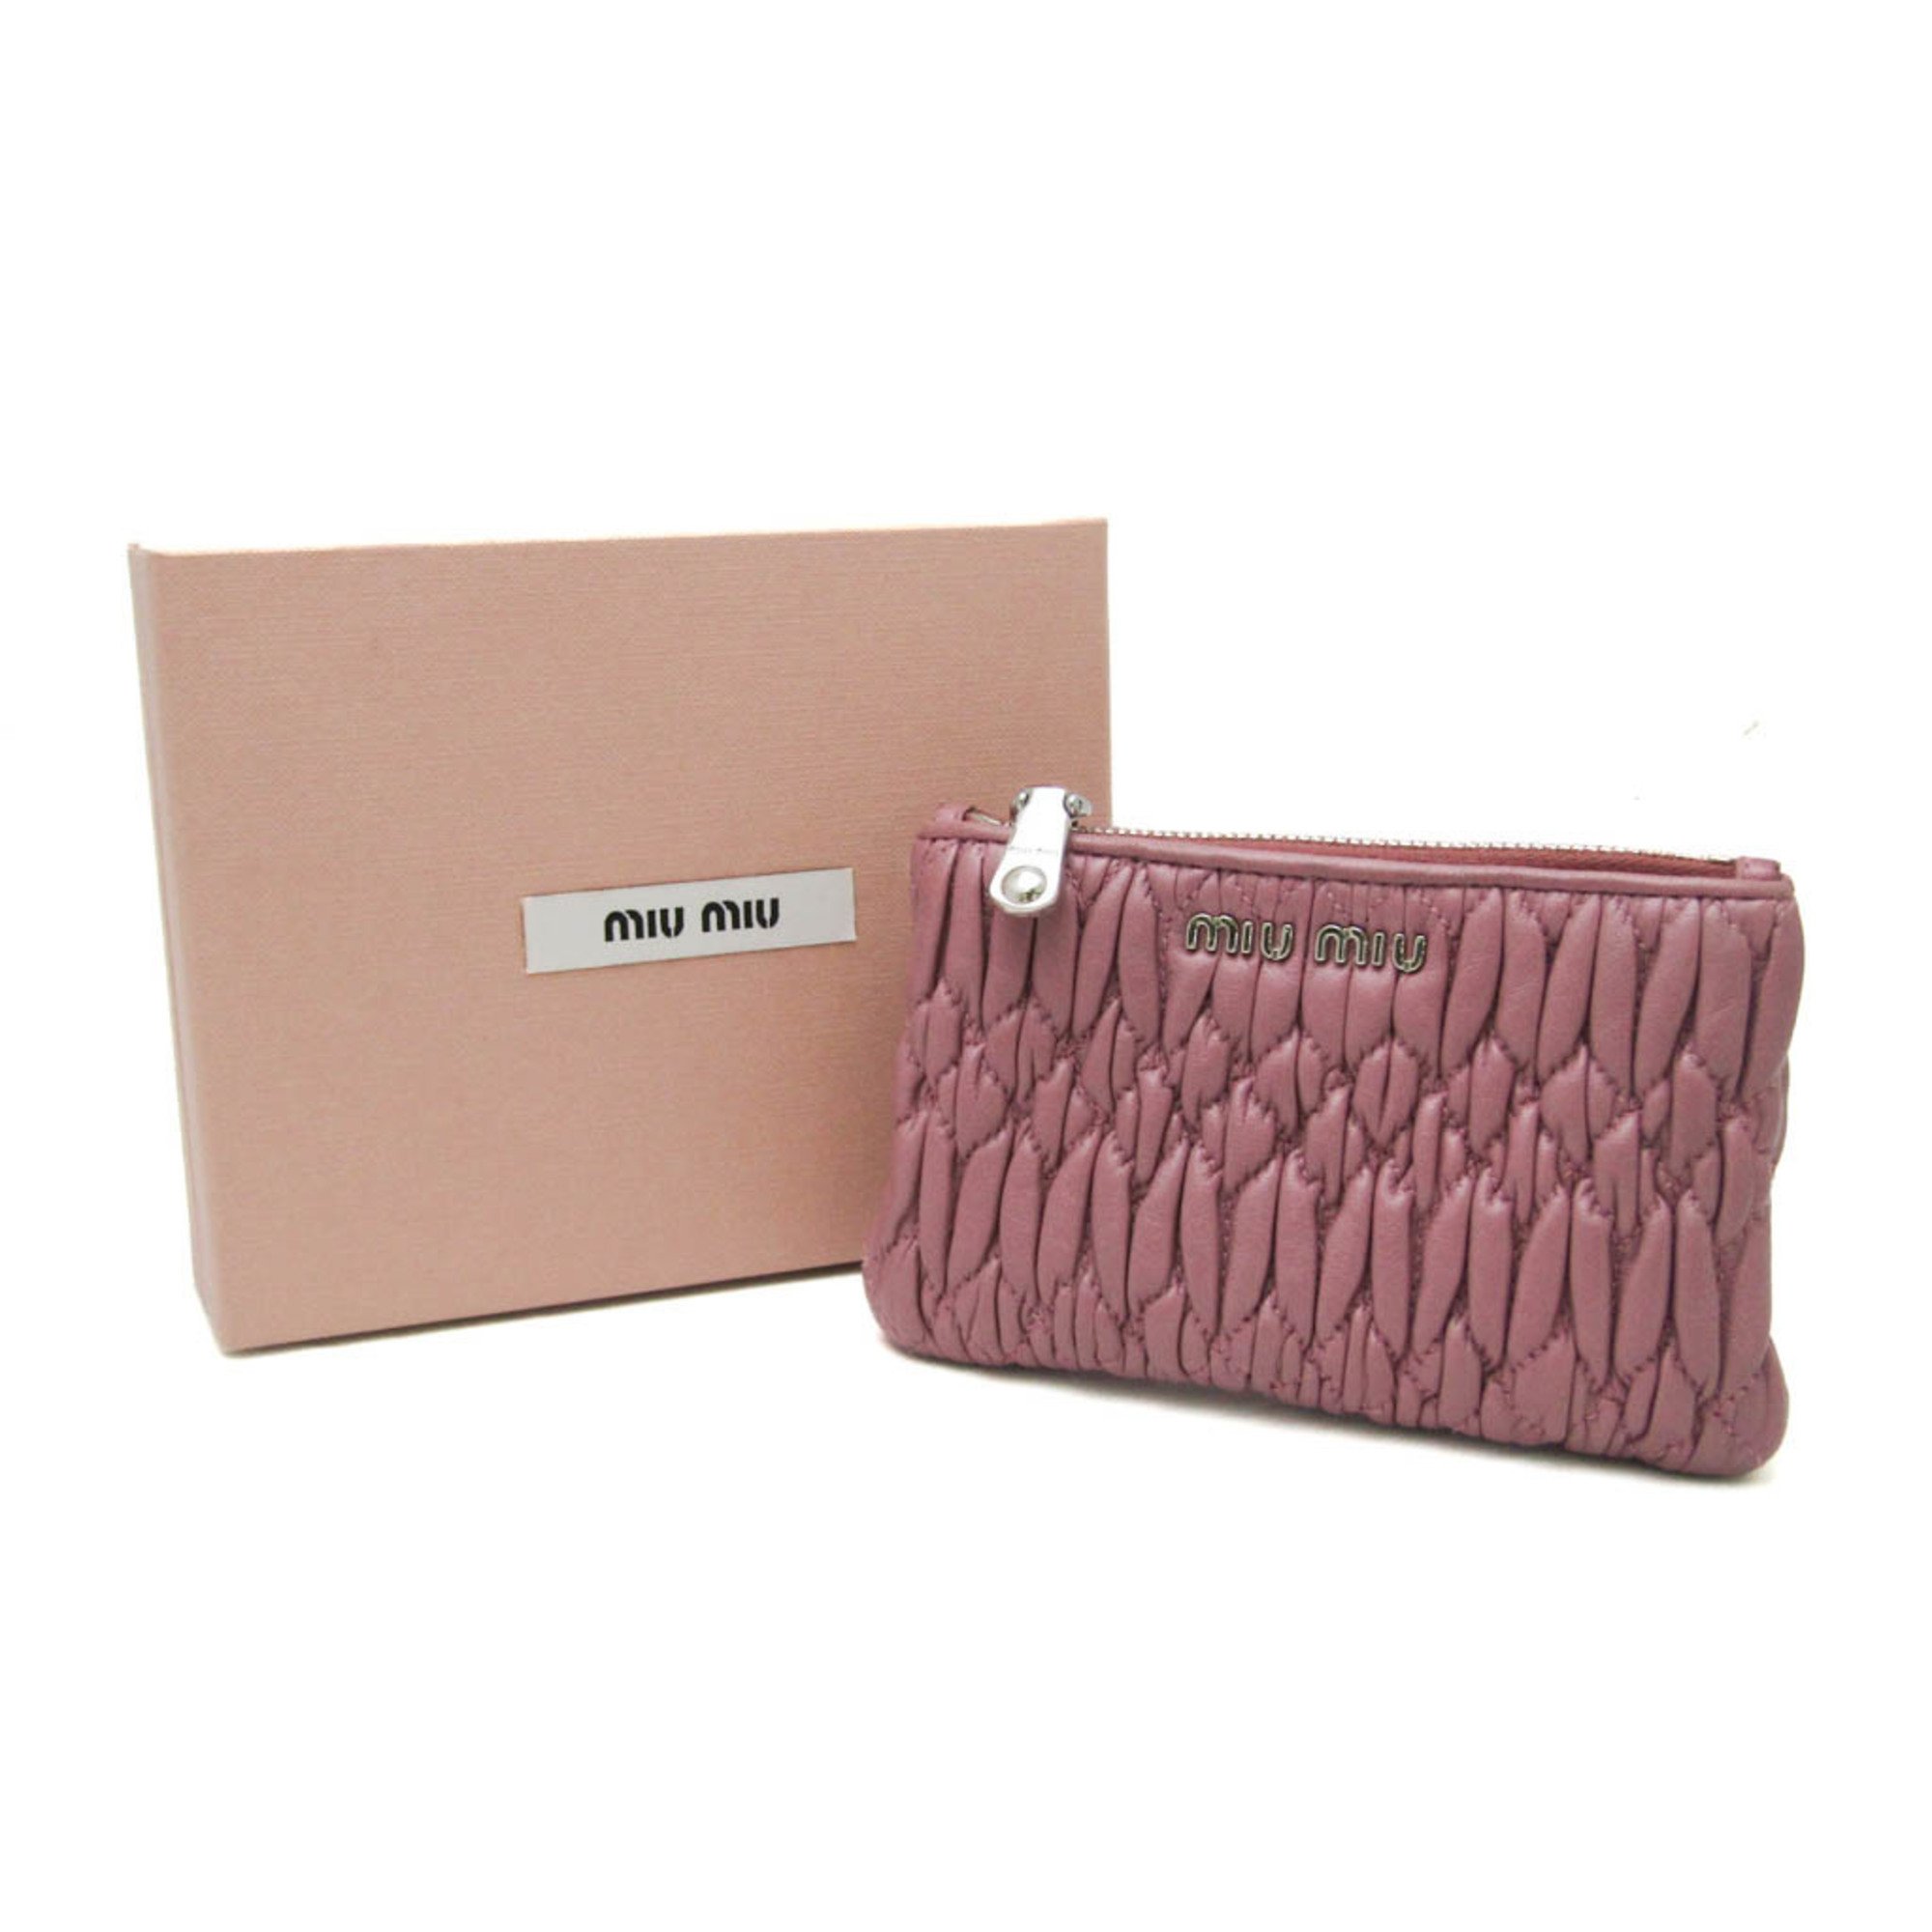 Miu Miu Matelasse With Key Ring Women's Leather Coin Purse/coin Case Light Purple